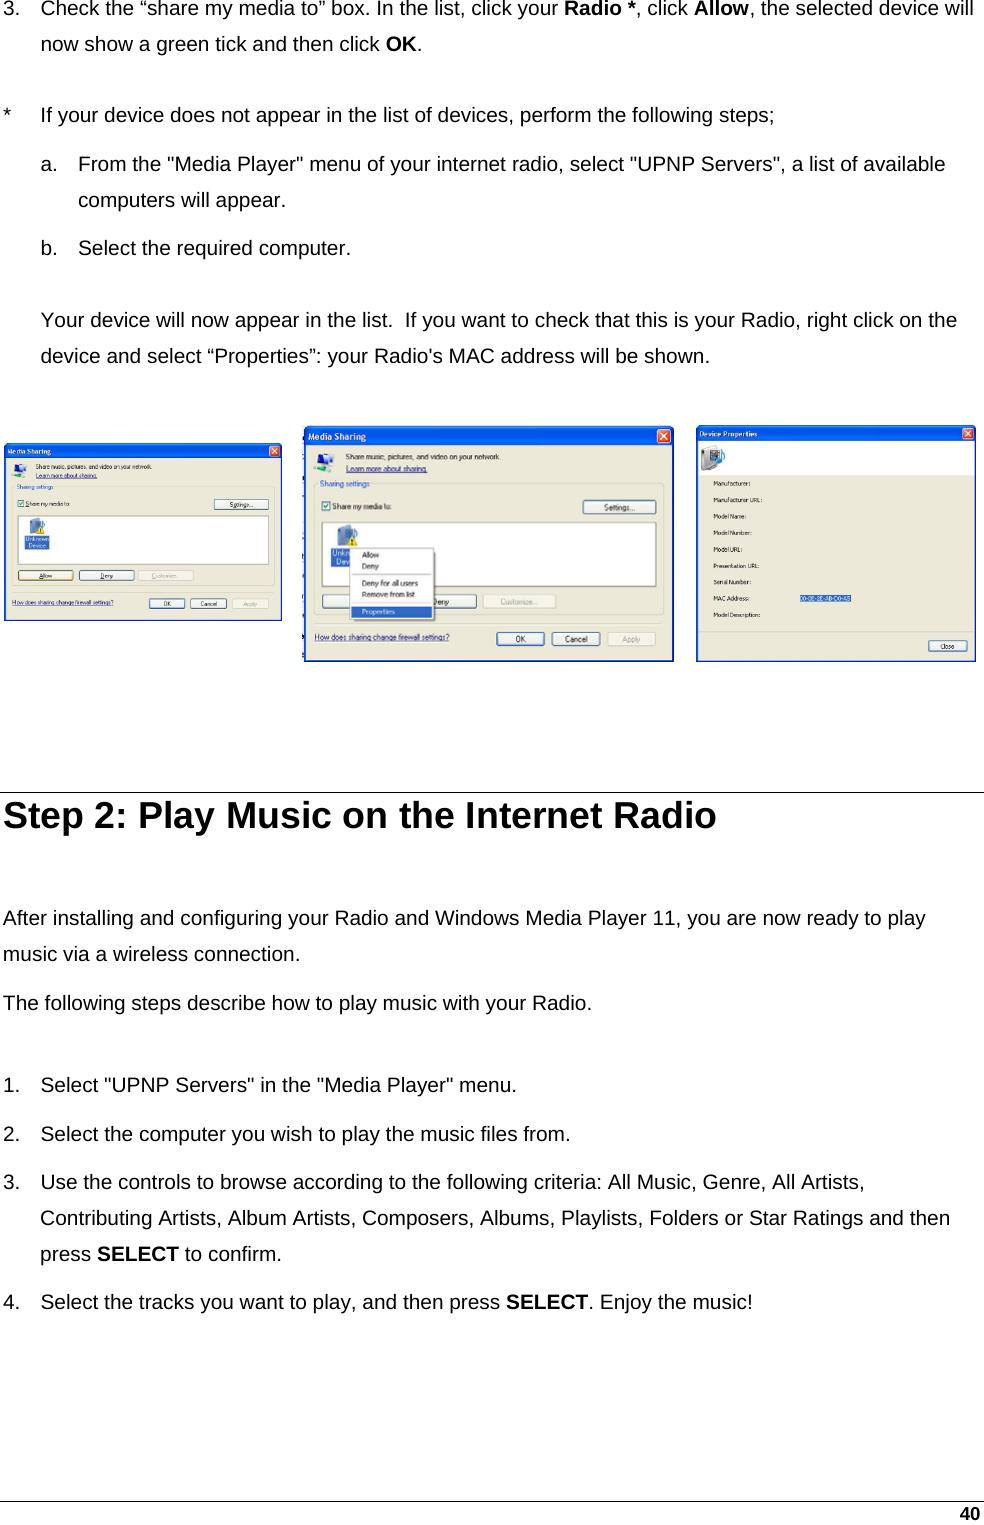 40 3.  Check the “share my media to” box. In the list, click your Radio *, click Allow, the selected device will now show a green tick and then click OK.  *  If your device does not appear in the list of devices, perform the following steps; a.  From the &quot;Media Player&quot; menu of your internet radio, select &quot;UPNP Servers&quot;, a list of available computers will appear. b.  Select the required computer.  Your device will now appear in the list.  If you want to check that this is your Radio, right click on the device and select “Properties”: your Radio&apos;s MAC address will be shown.     Step 2: Play Music on the Internet Radio  After installing and configuring your Radio and Windows Media Player 11, you are now ready to play music via a wireless connection.  The following steps describe how to play music with your Radio.  1.  Select &quot;UPNP Servers&quot; in the &quot;Media Player&quot; menu. 2.  Select the computer you wish to play the music files from. 3.  Use the controls to browse according to the following criteria: All Music, Genre, All Artists, Contributing Artists, Album Artists, Composers, Albums, Playlists, Folders or Star Ratings and then press SELECT to confirm. 4.  Select the tracks you want to play, and then press SELECT. Enjoy the music! 